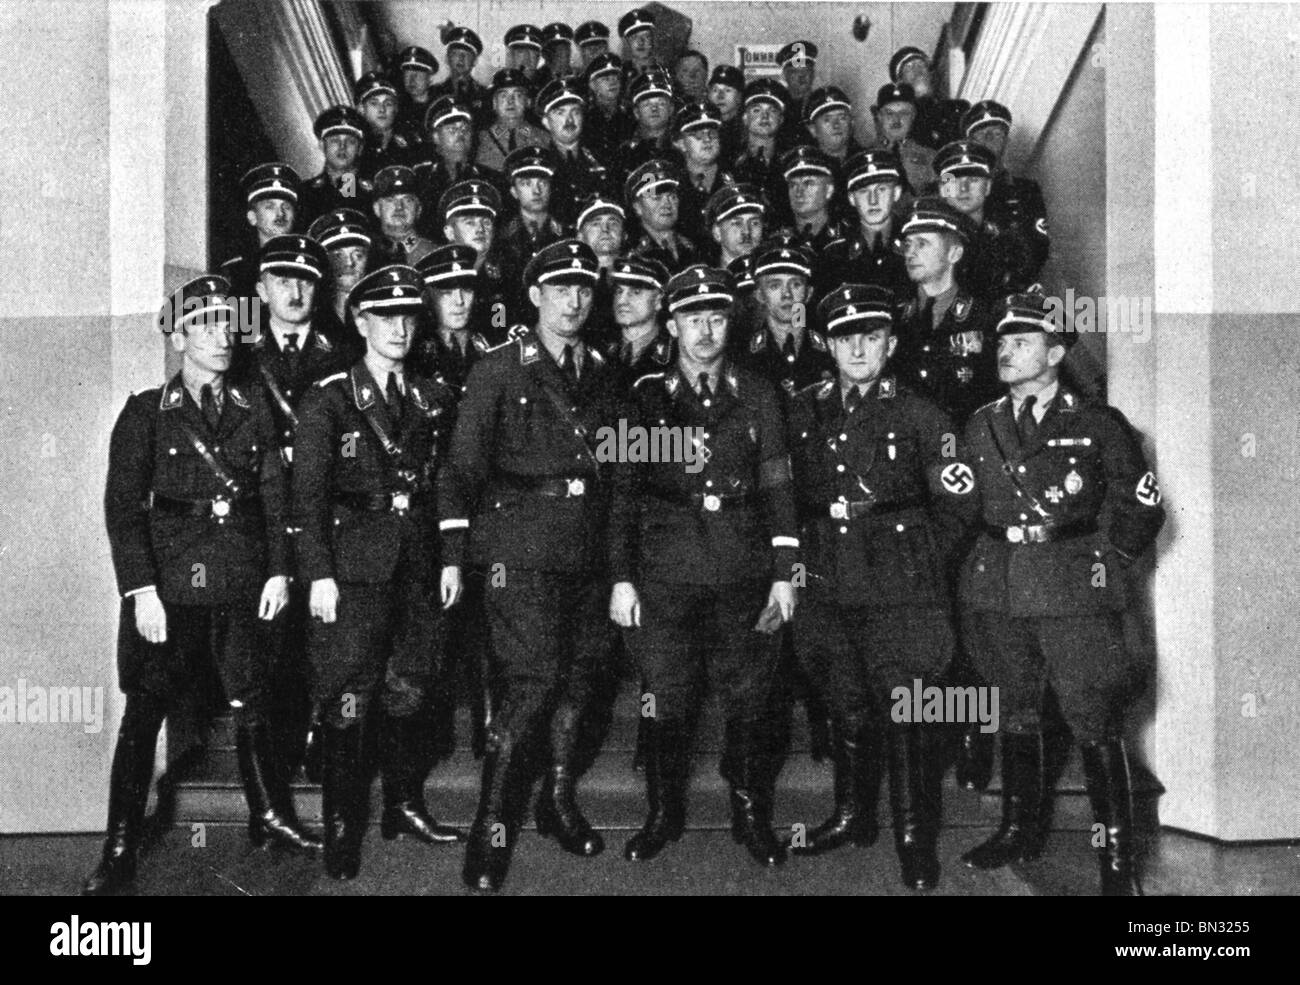 HEINRICH HIMMLER (1900-1945) Nazi Party leader of the SS at front centre of group of SS officers Stock Photo